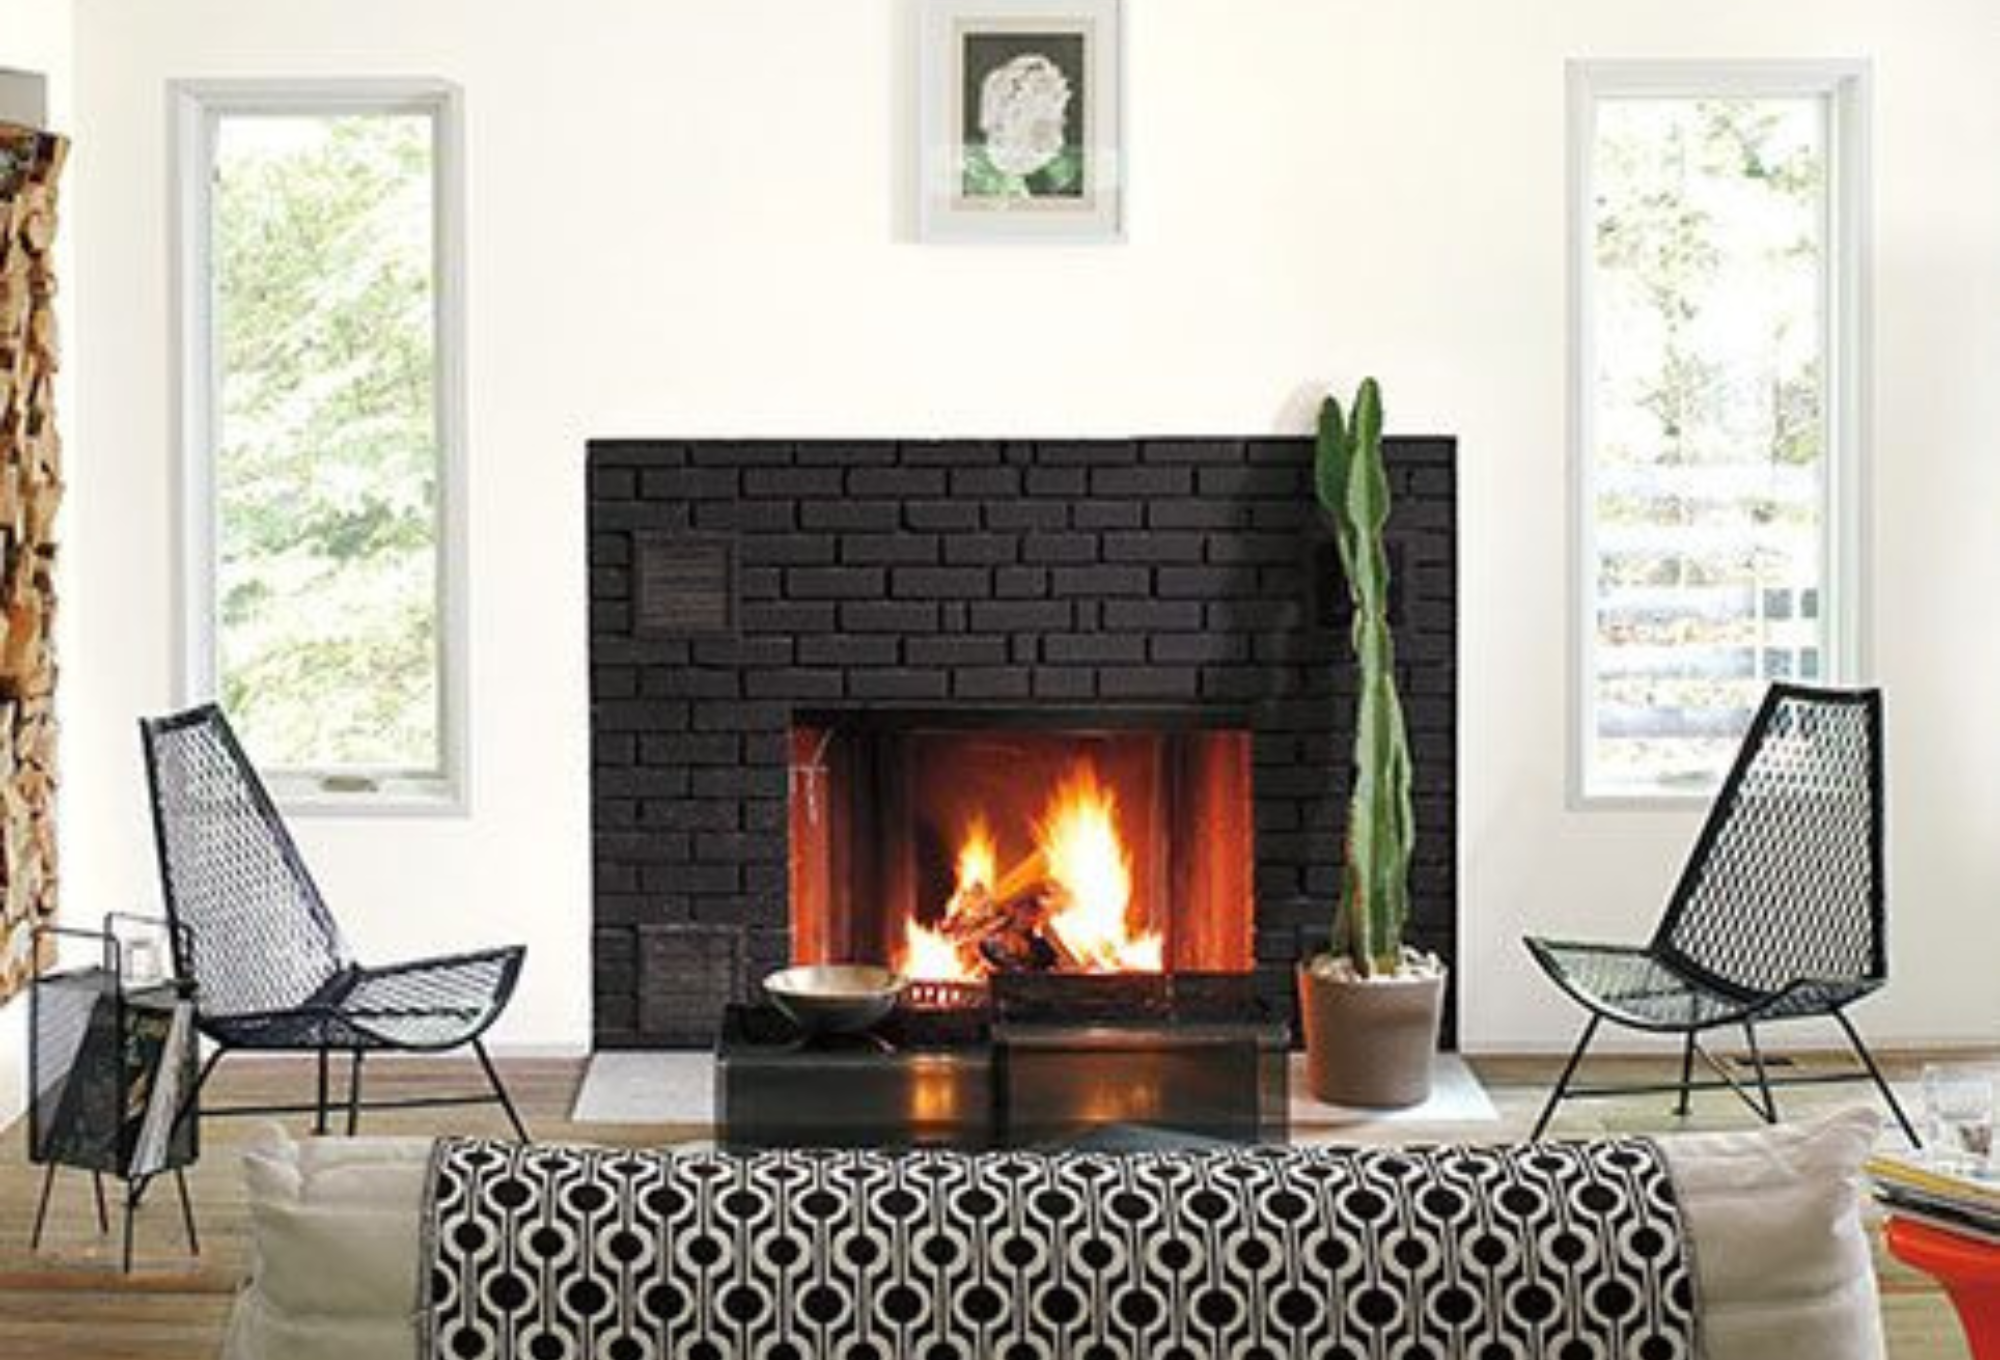 Benjamin Moore Fireplace Brick Paint available at JC Licht.